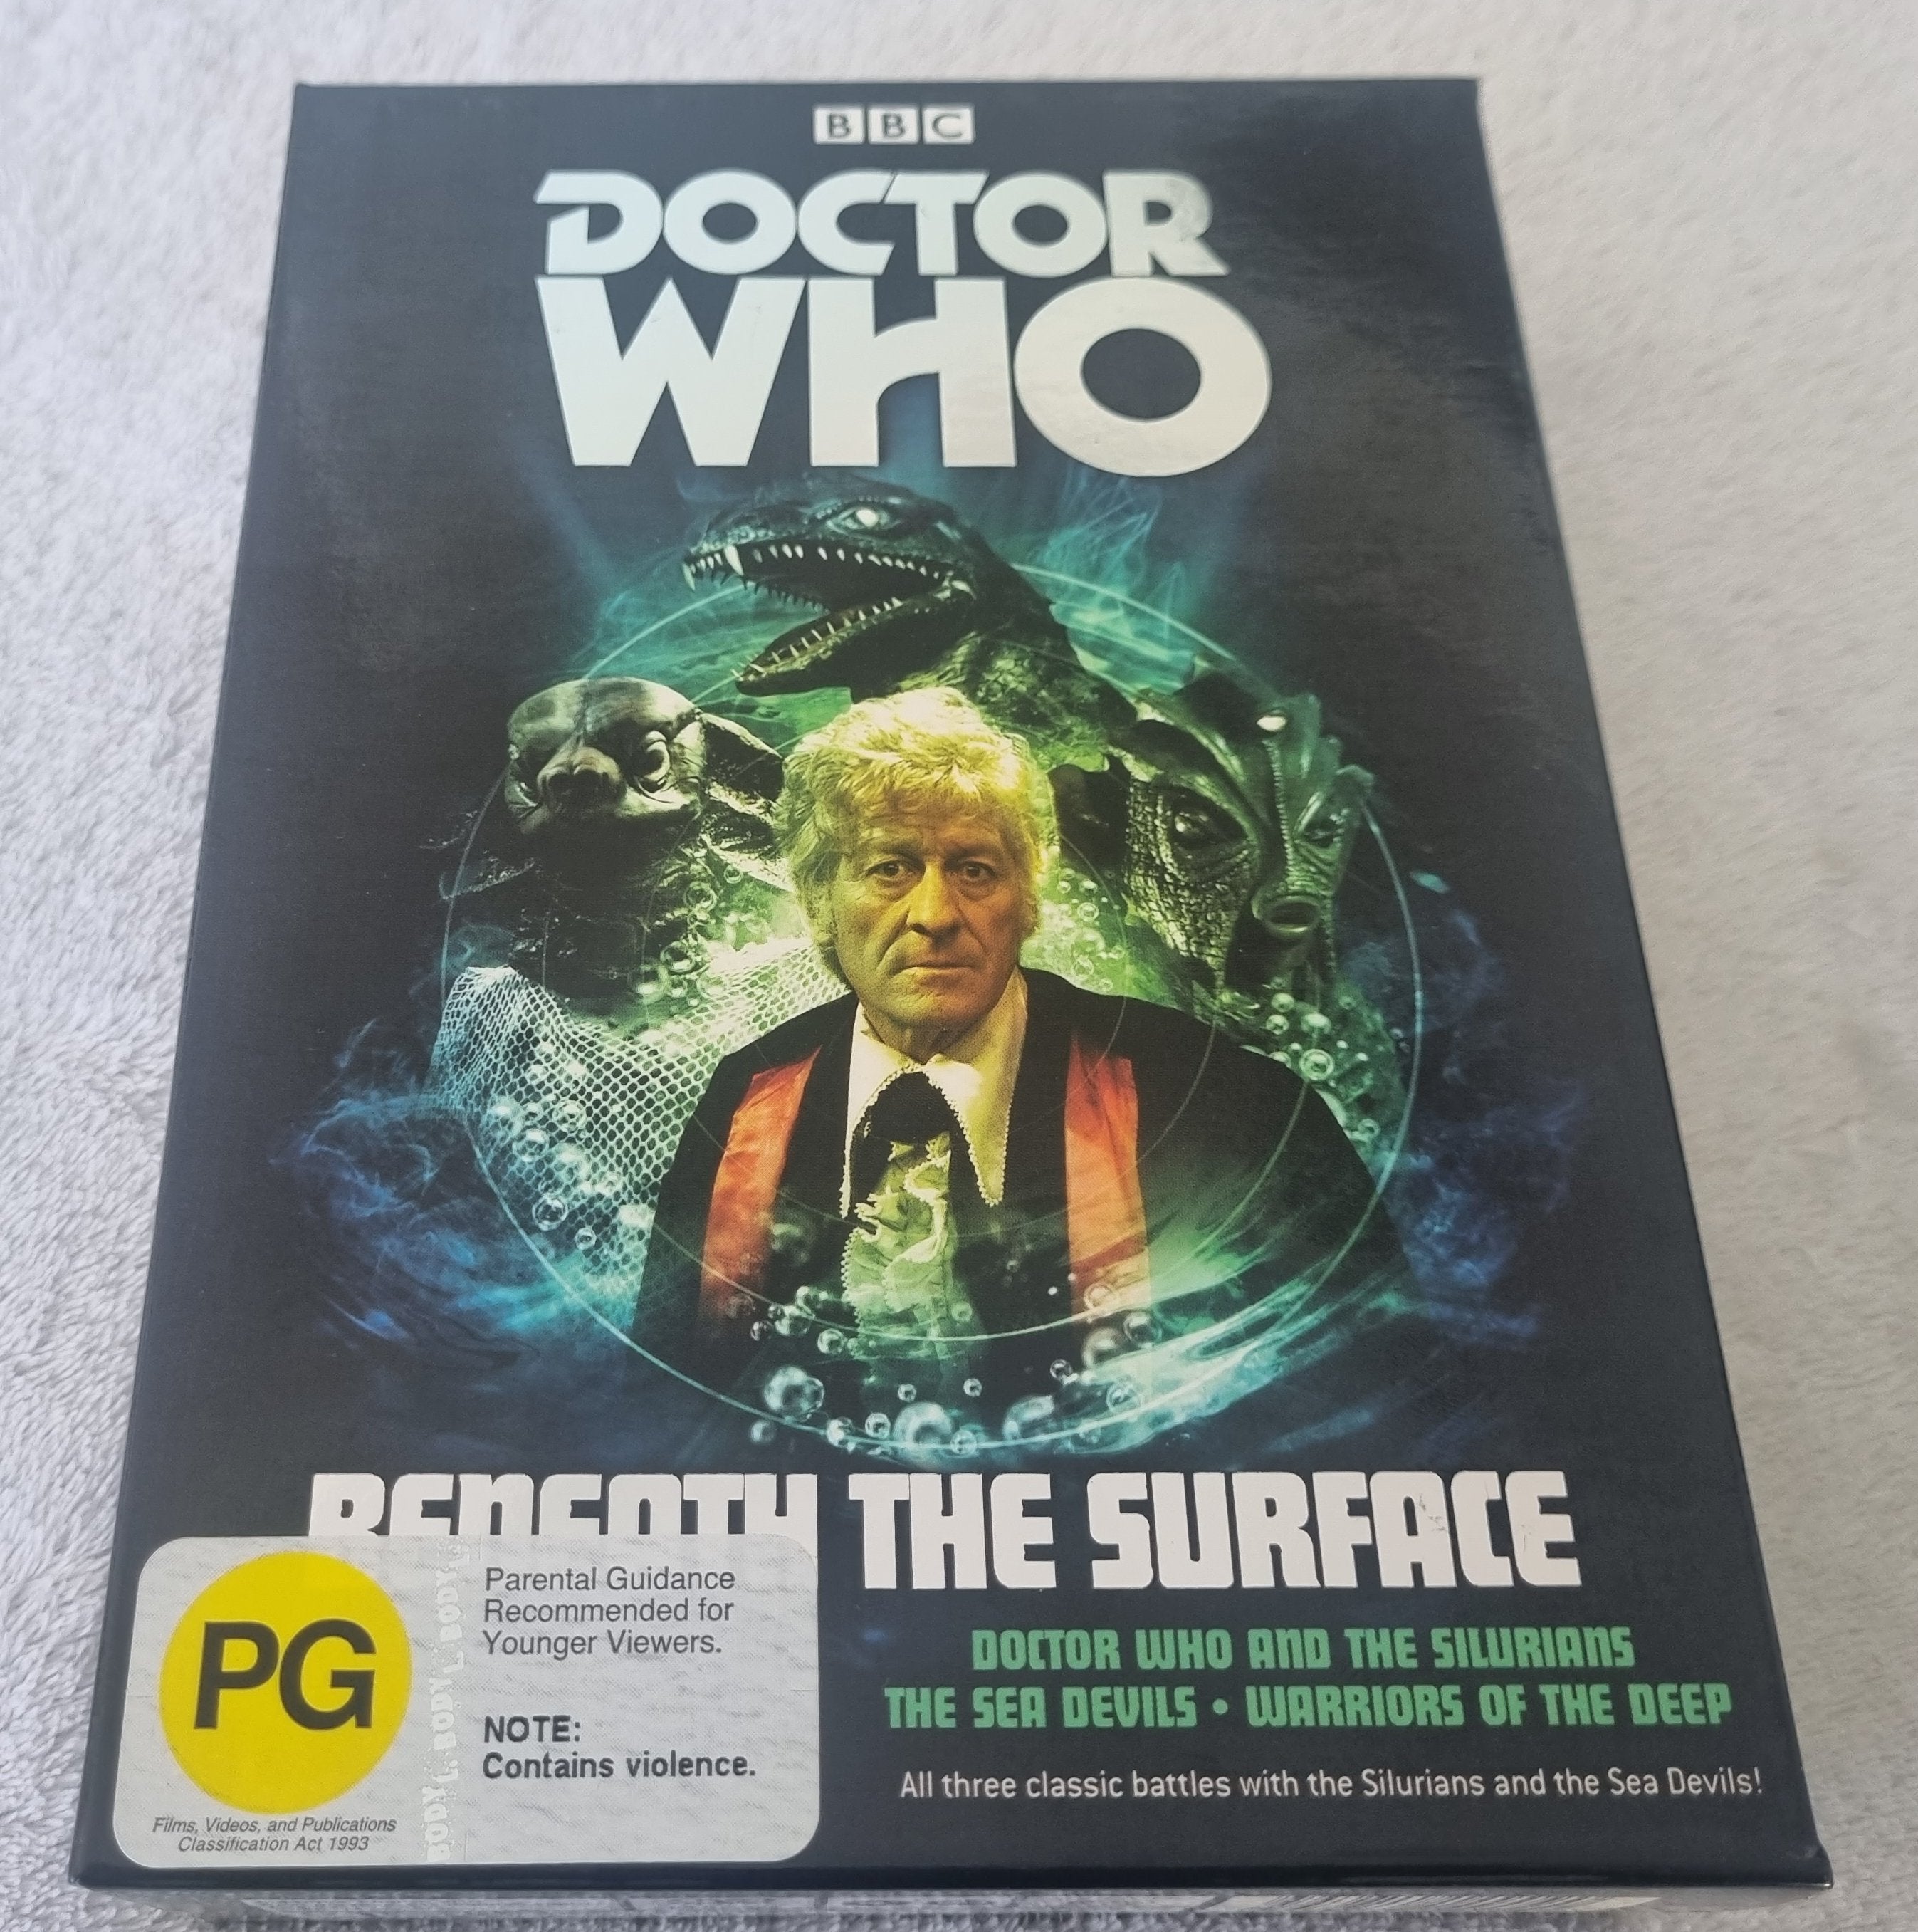 Doctor Who: Beneath the Surface